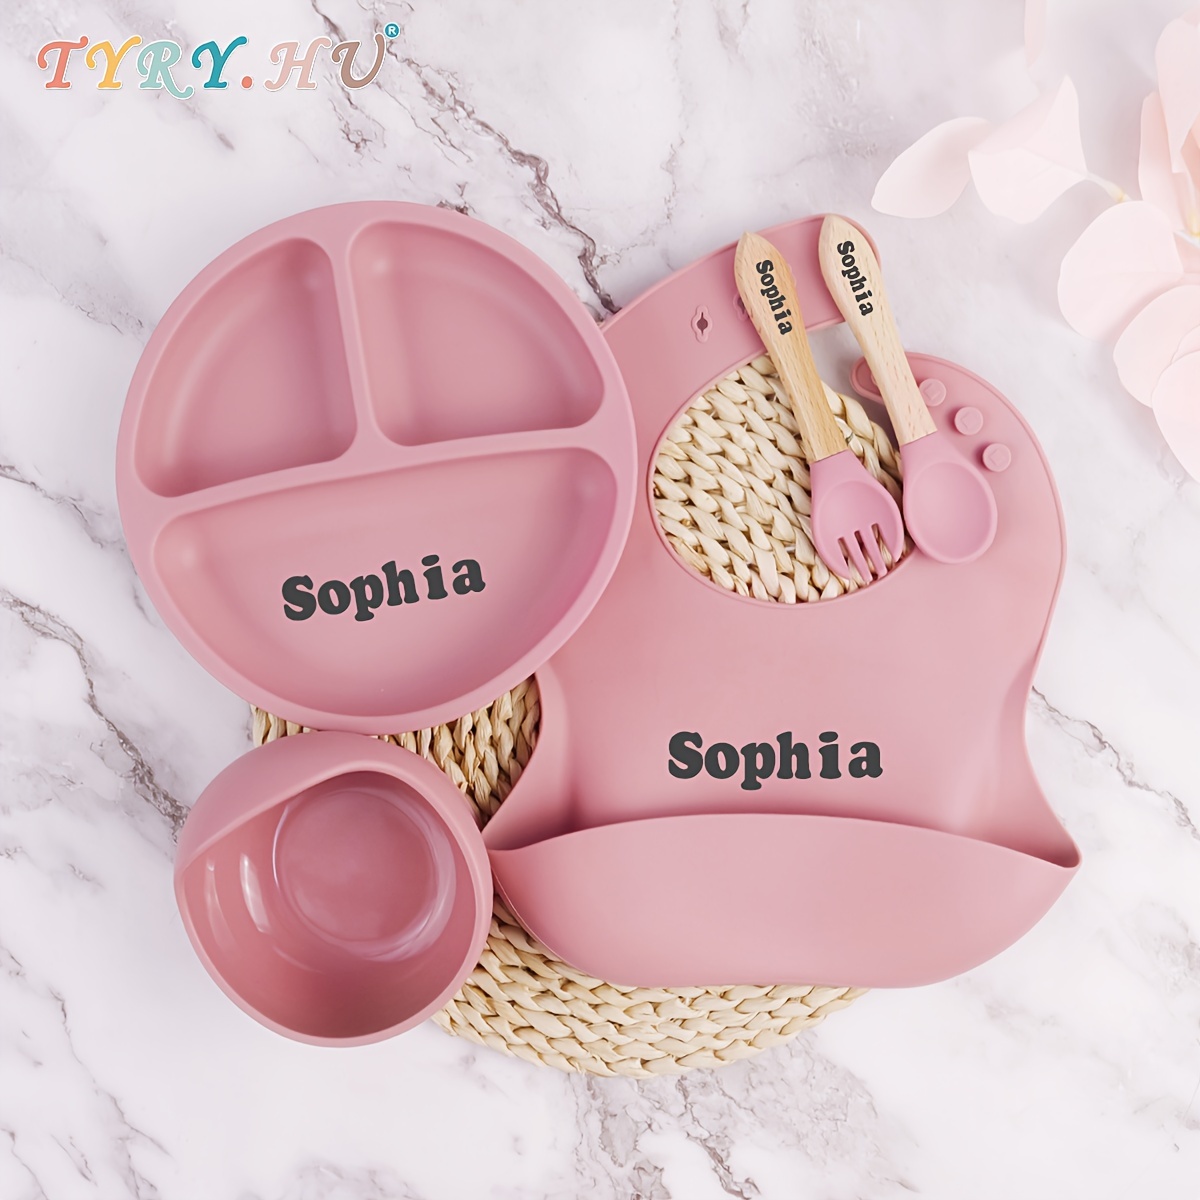 

Customizable Silicone Baby Feeding Set - Bpa-free, Cartoon Design For Toddlers 0-3 Years - Perfect Gift For Baby Showers, Christmas & Thanksgiving Baby Accessories Personalized Baby Items